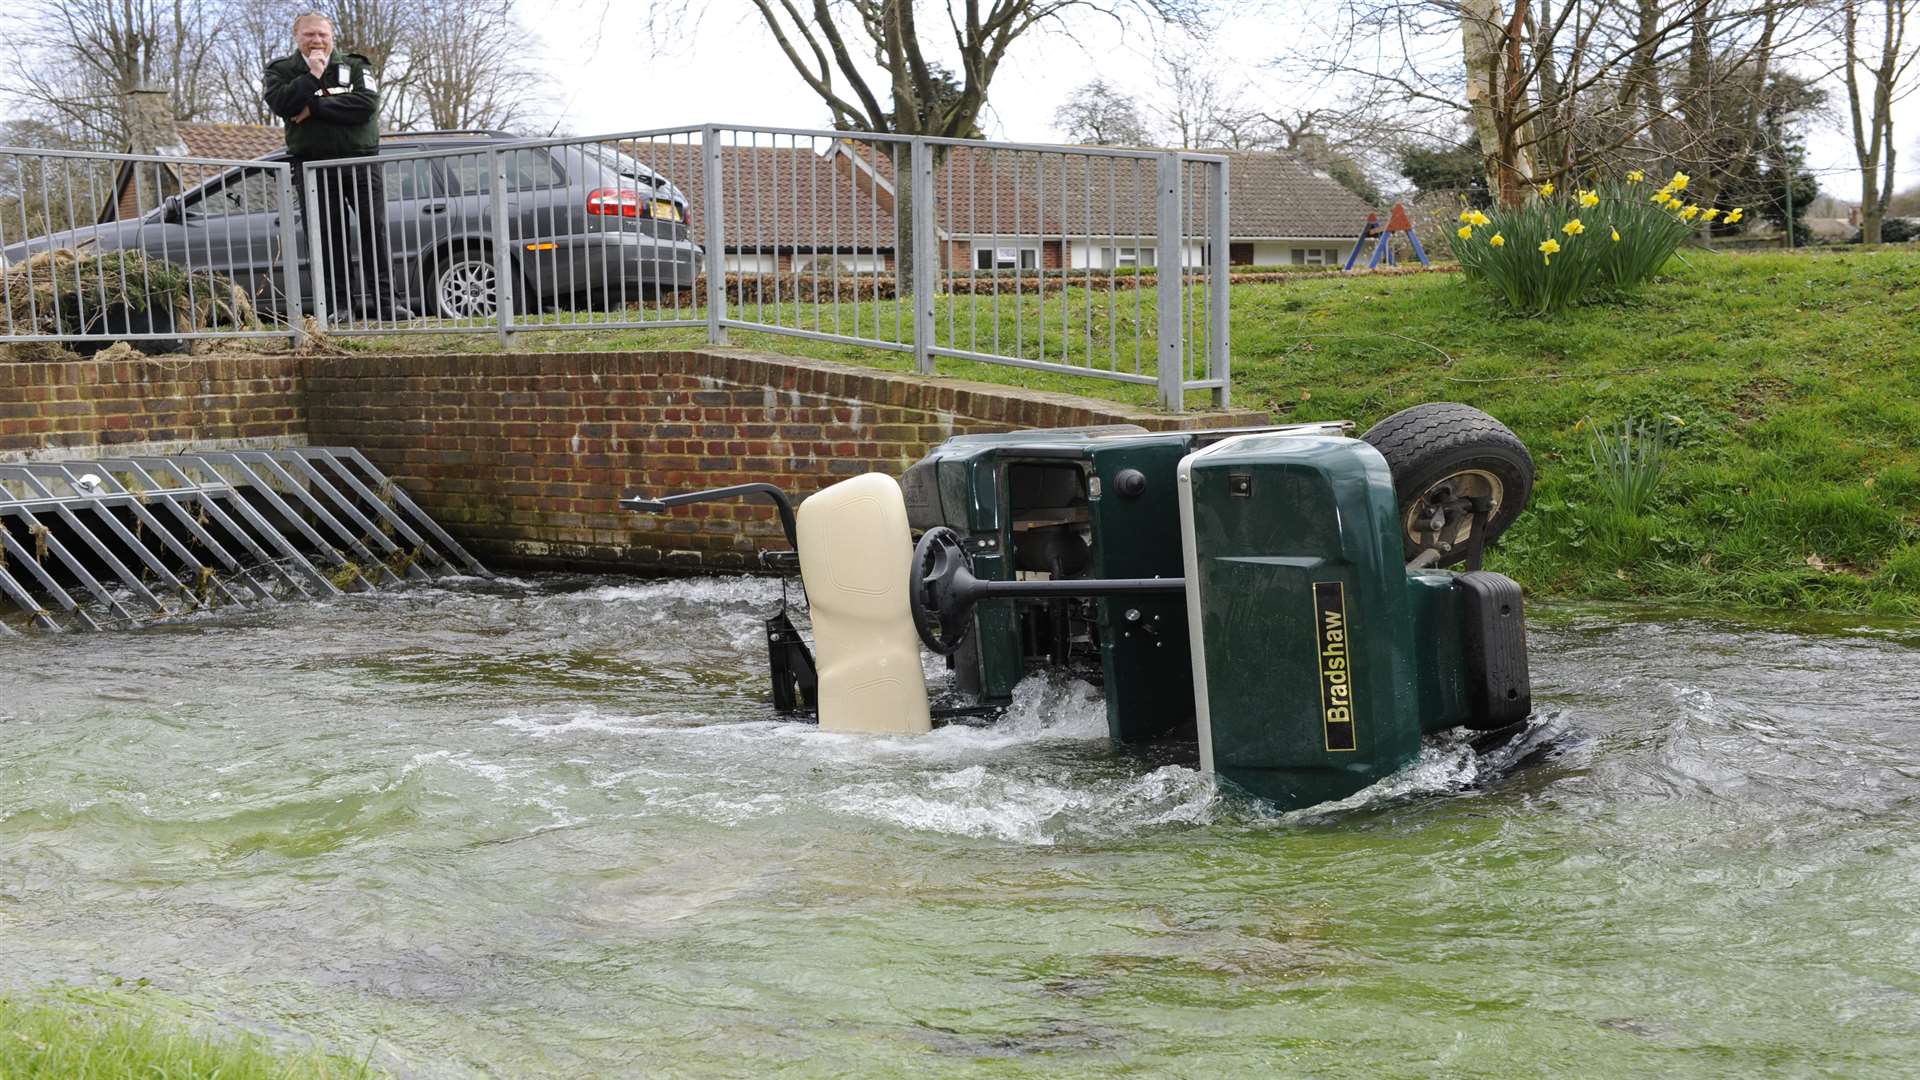 A golf cart discovered in the Nailbourne after being taken from Broome Park golf club